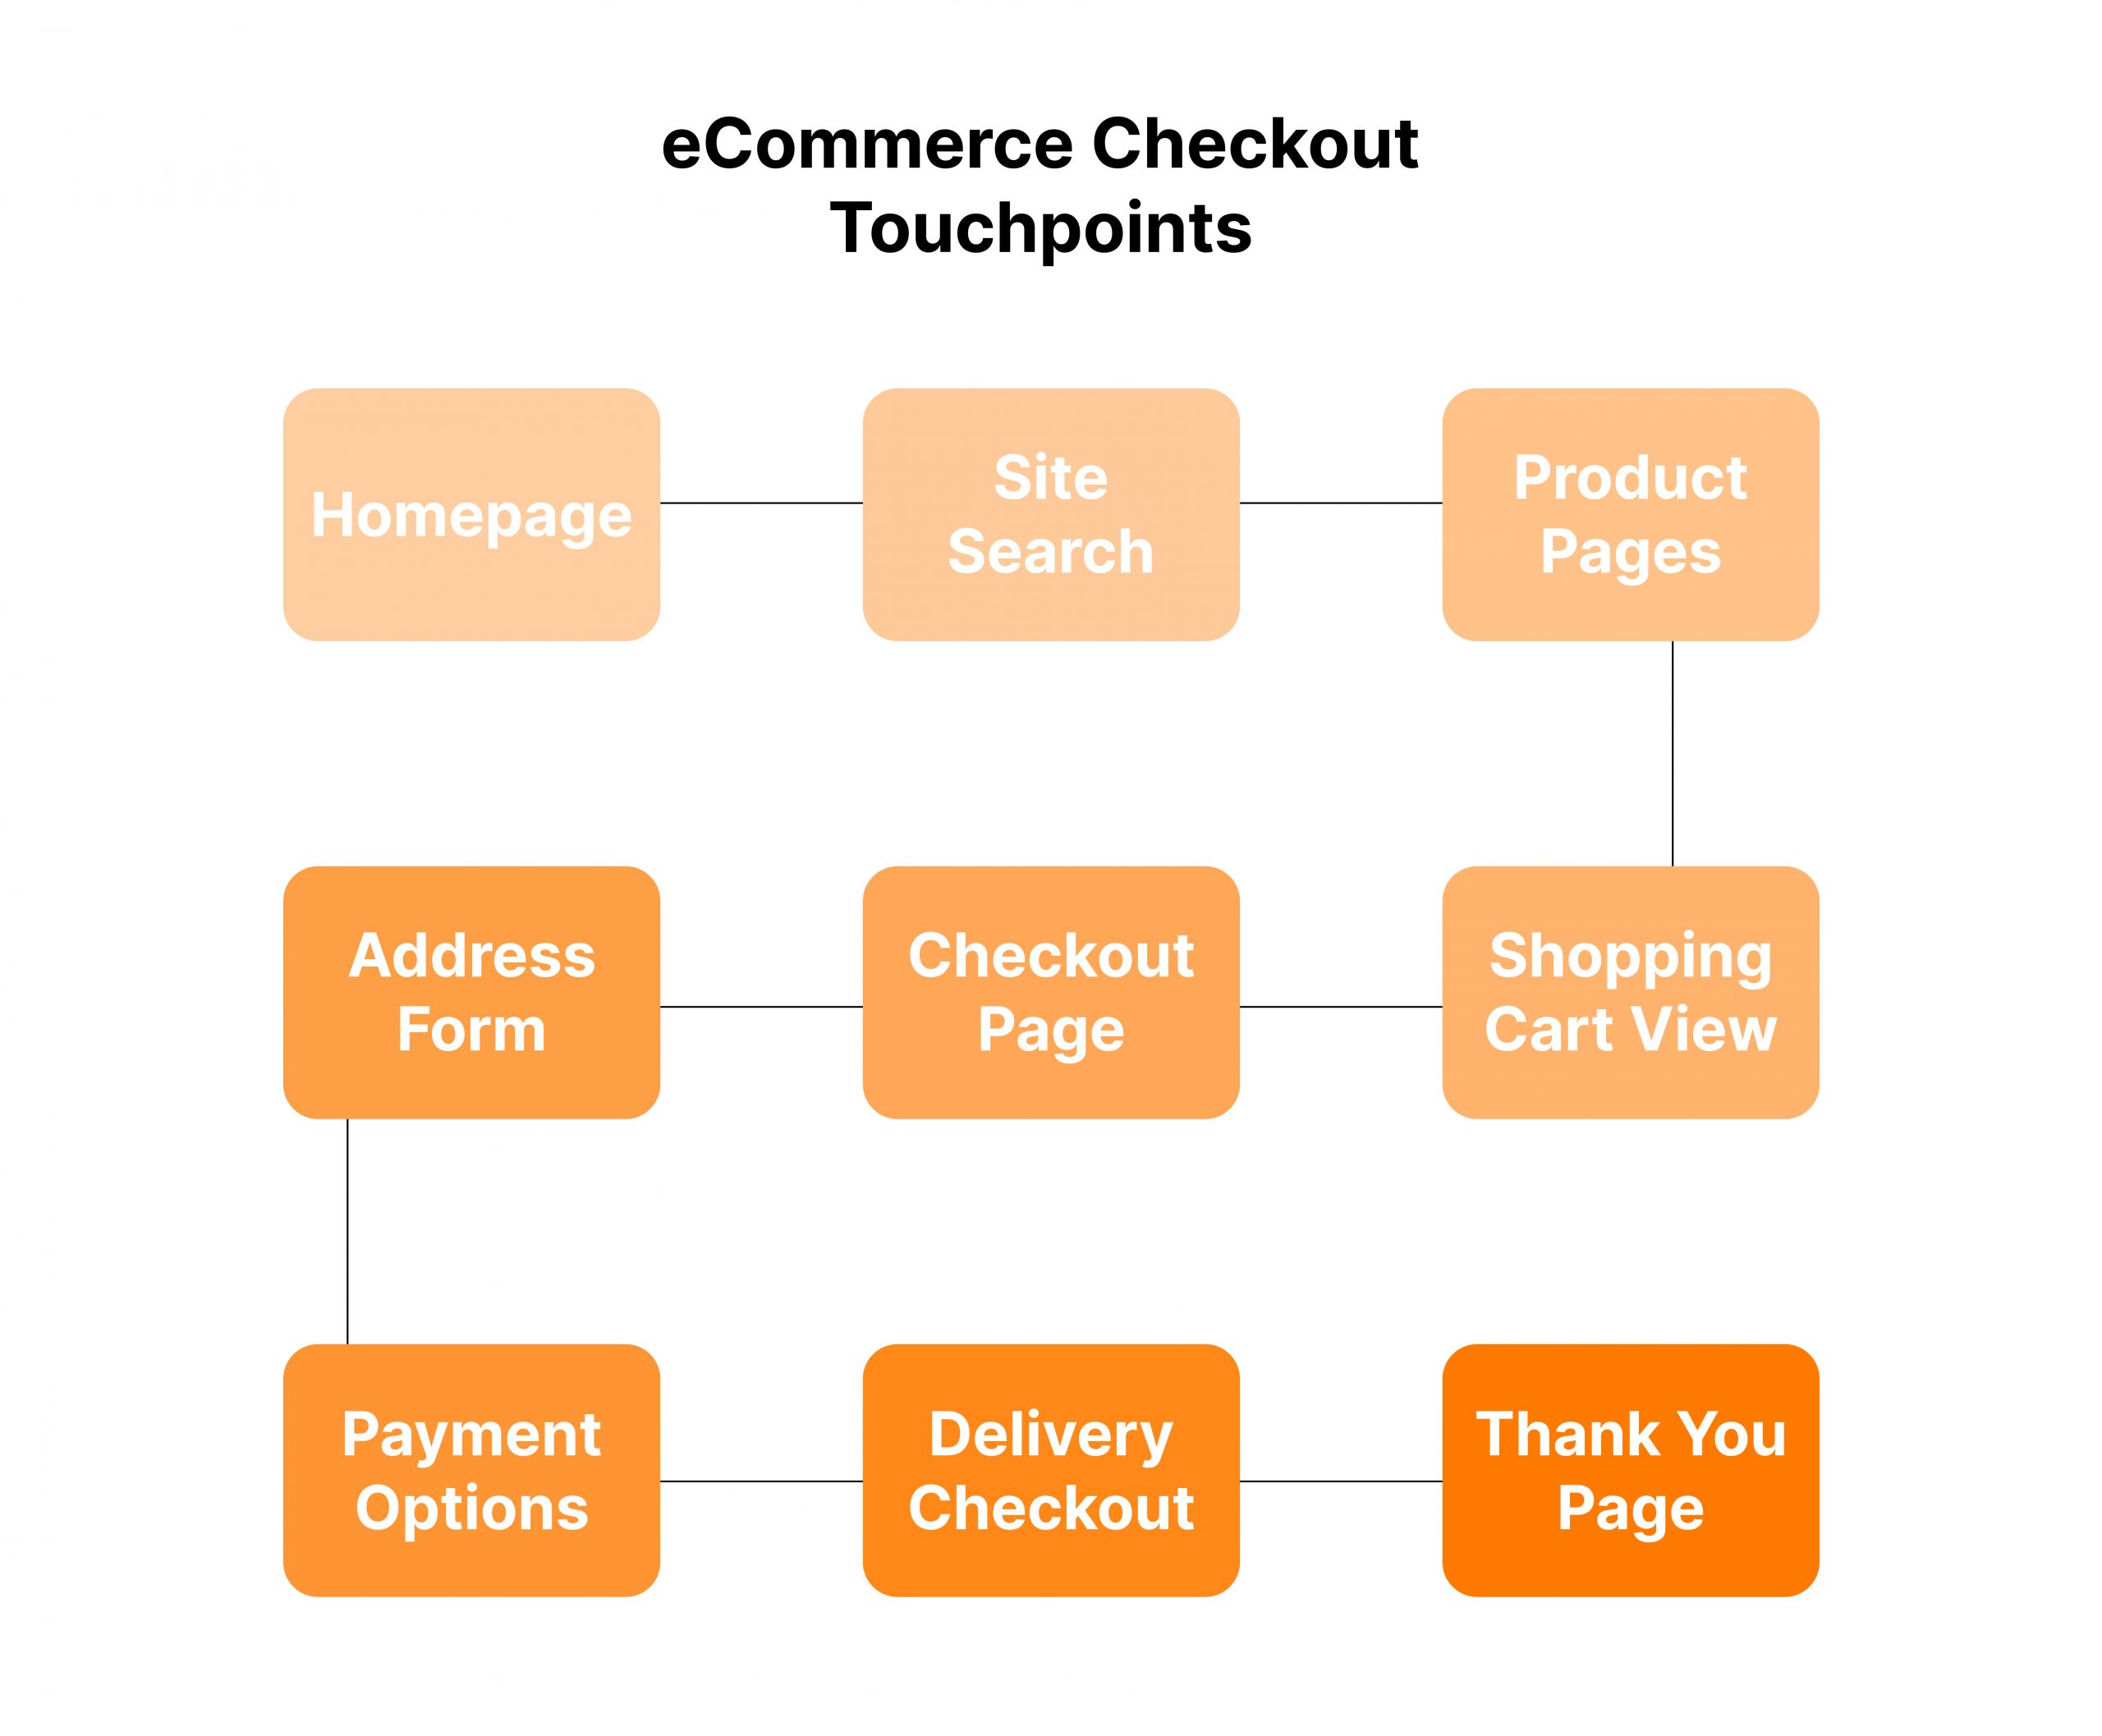 Touchpoints starting from the eCommerce shopping experience to the checkout experience